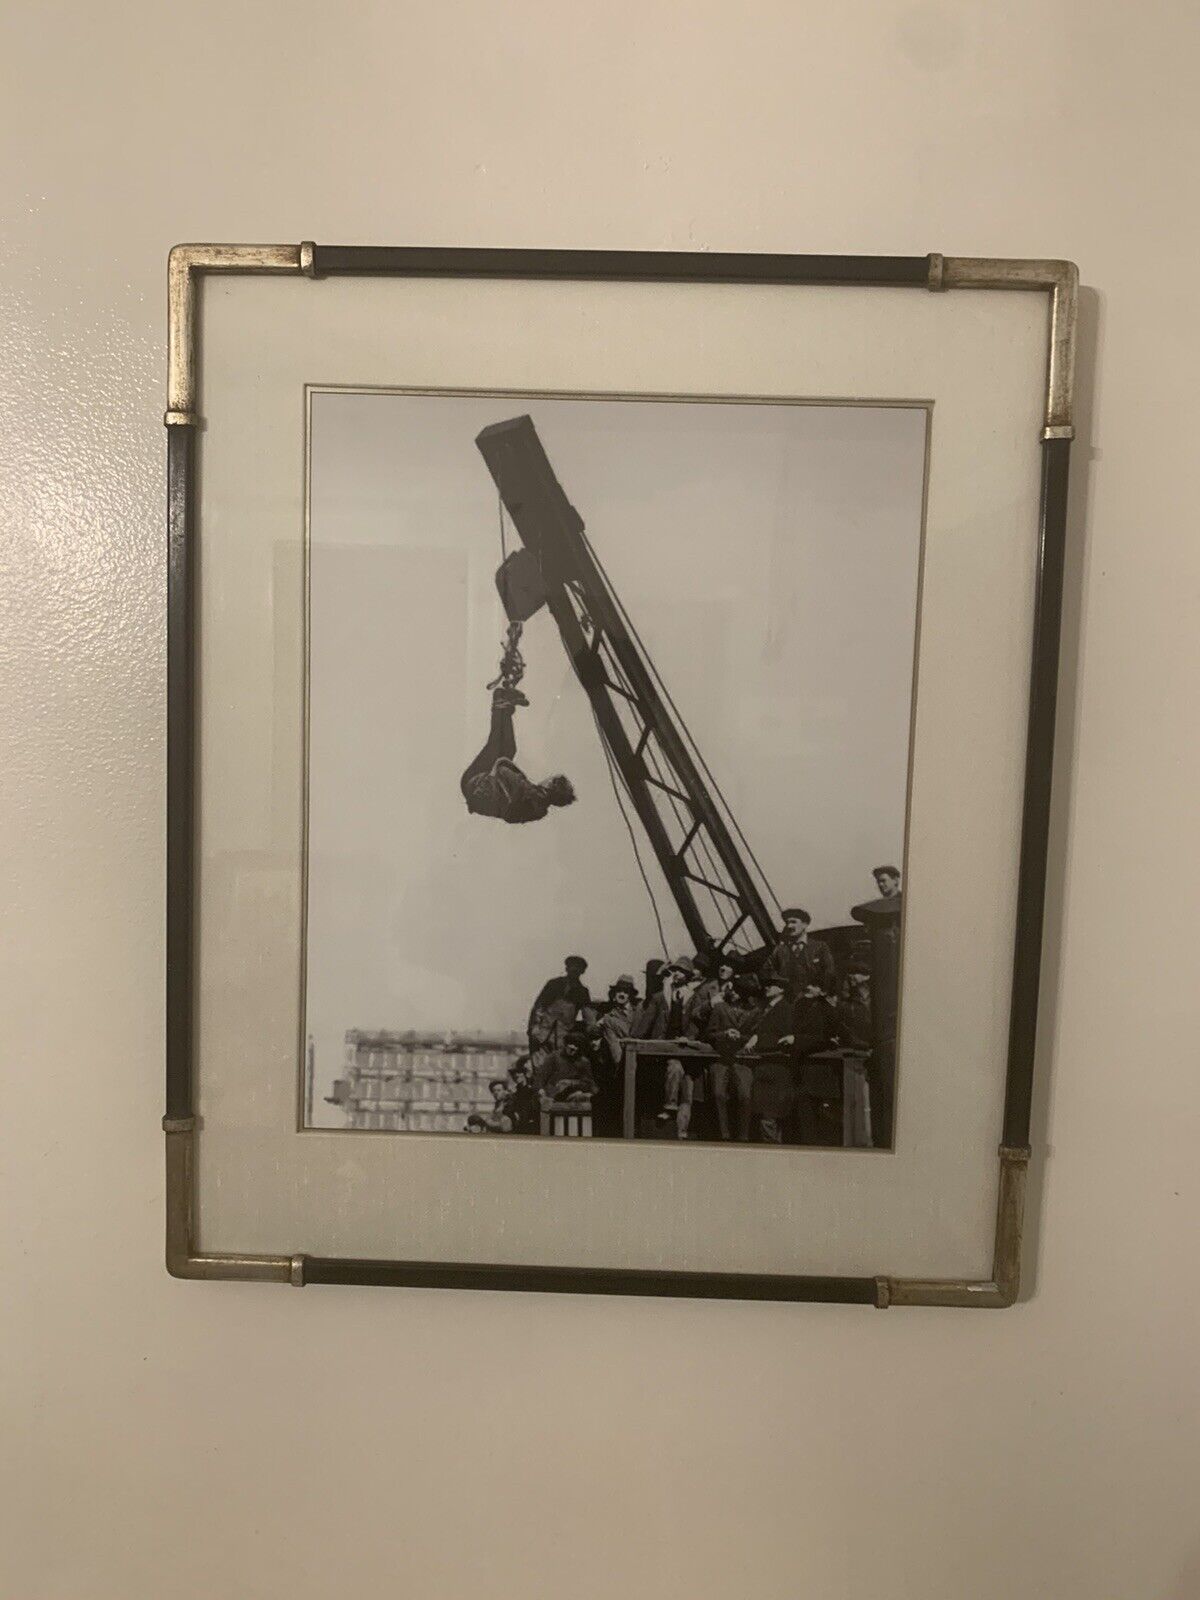 Framed print of Houdini hanging from crane in Straight Jacket 22.5 x 18.5”